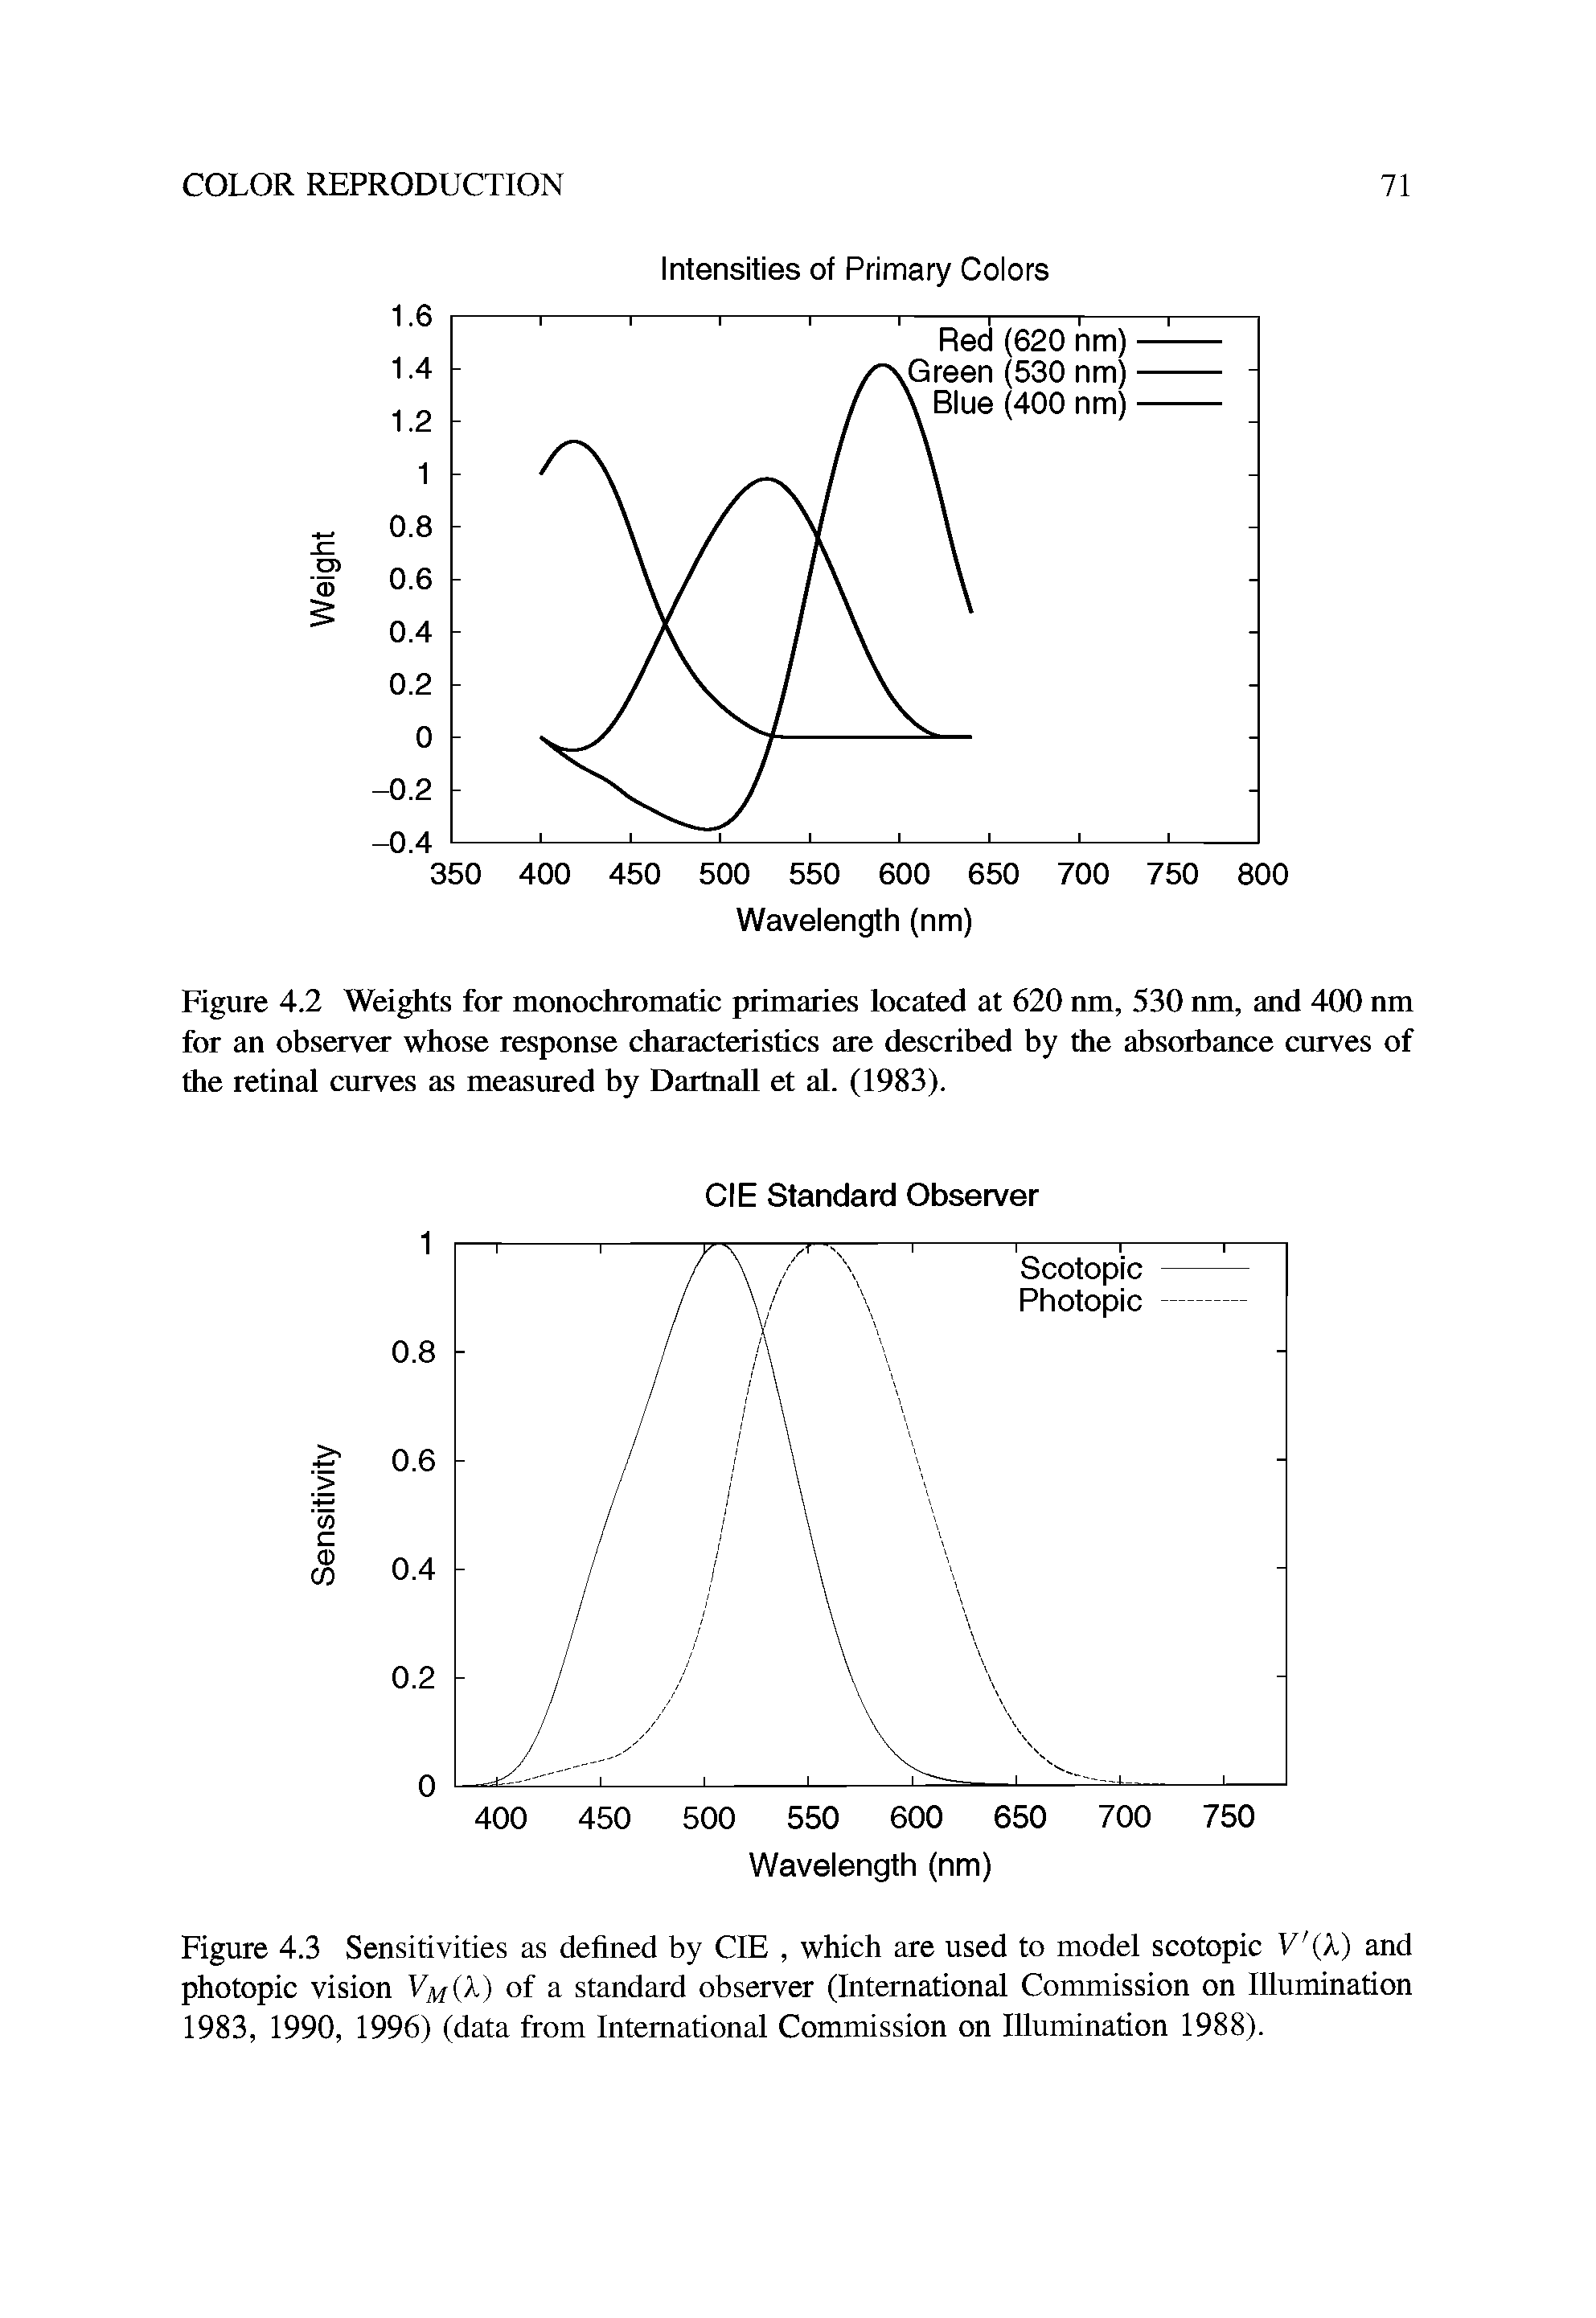 Figure 4.3 Sensitivities as defined by CIE, which are used to model scotopic V (X) and photopic vision VM(k) of a standard observer (International Commission on Illumination 1983, 1990, 1996) (data from International Commission on Illumination 1988).